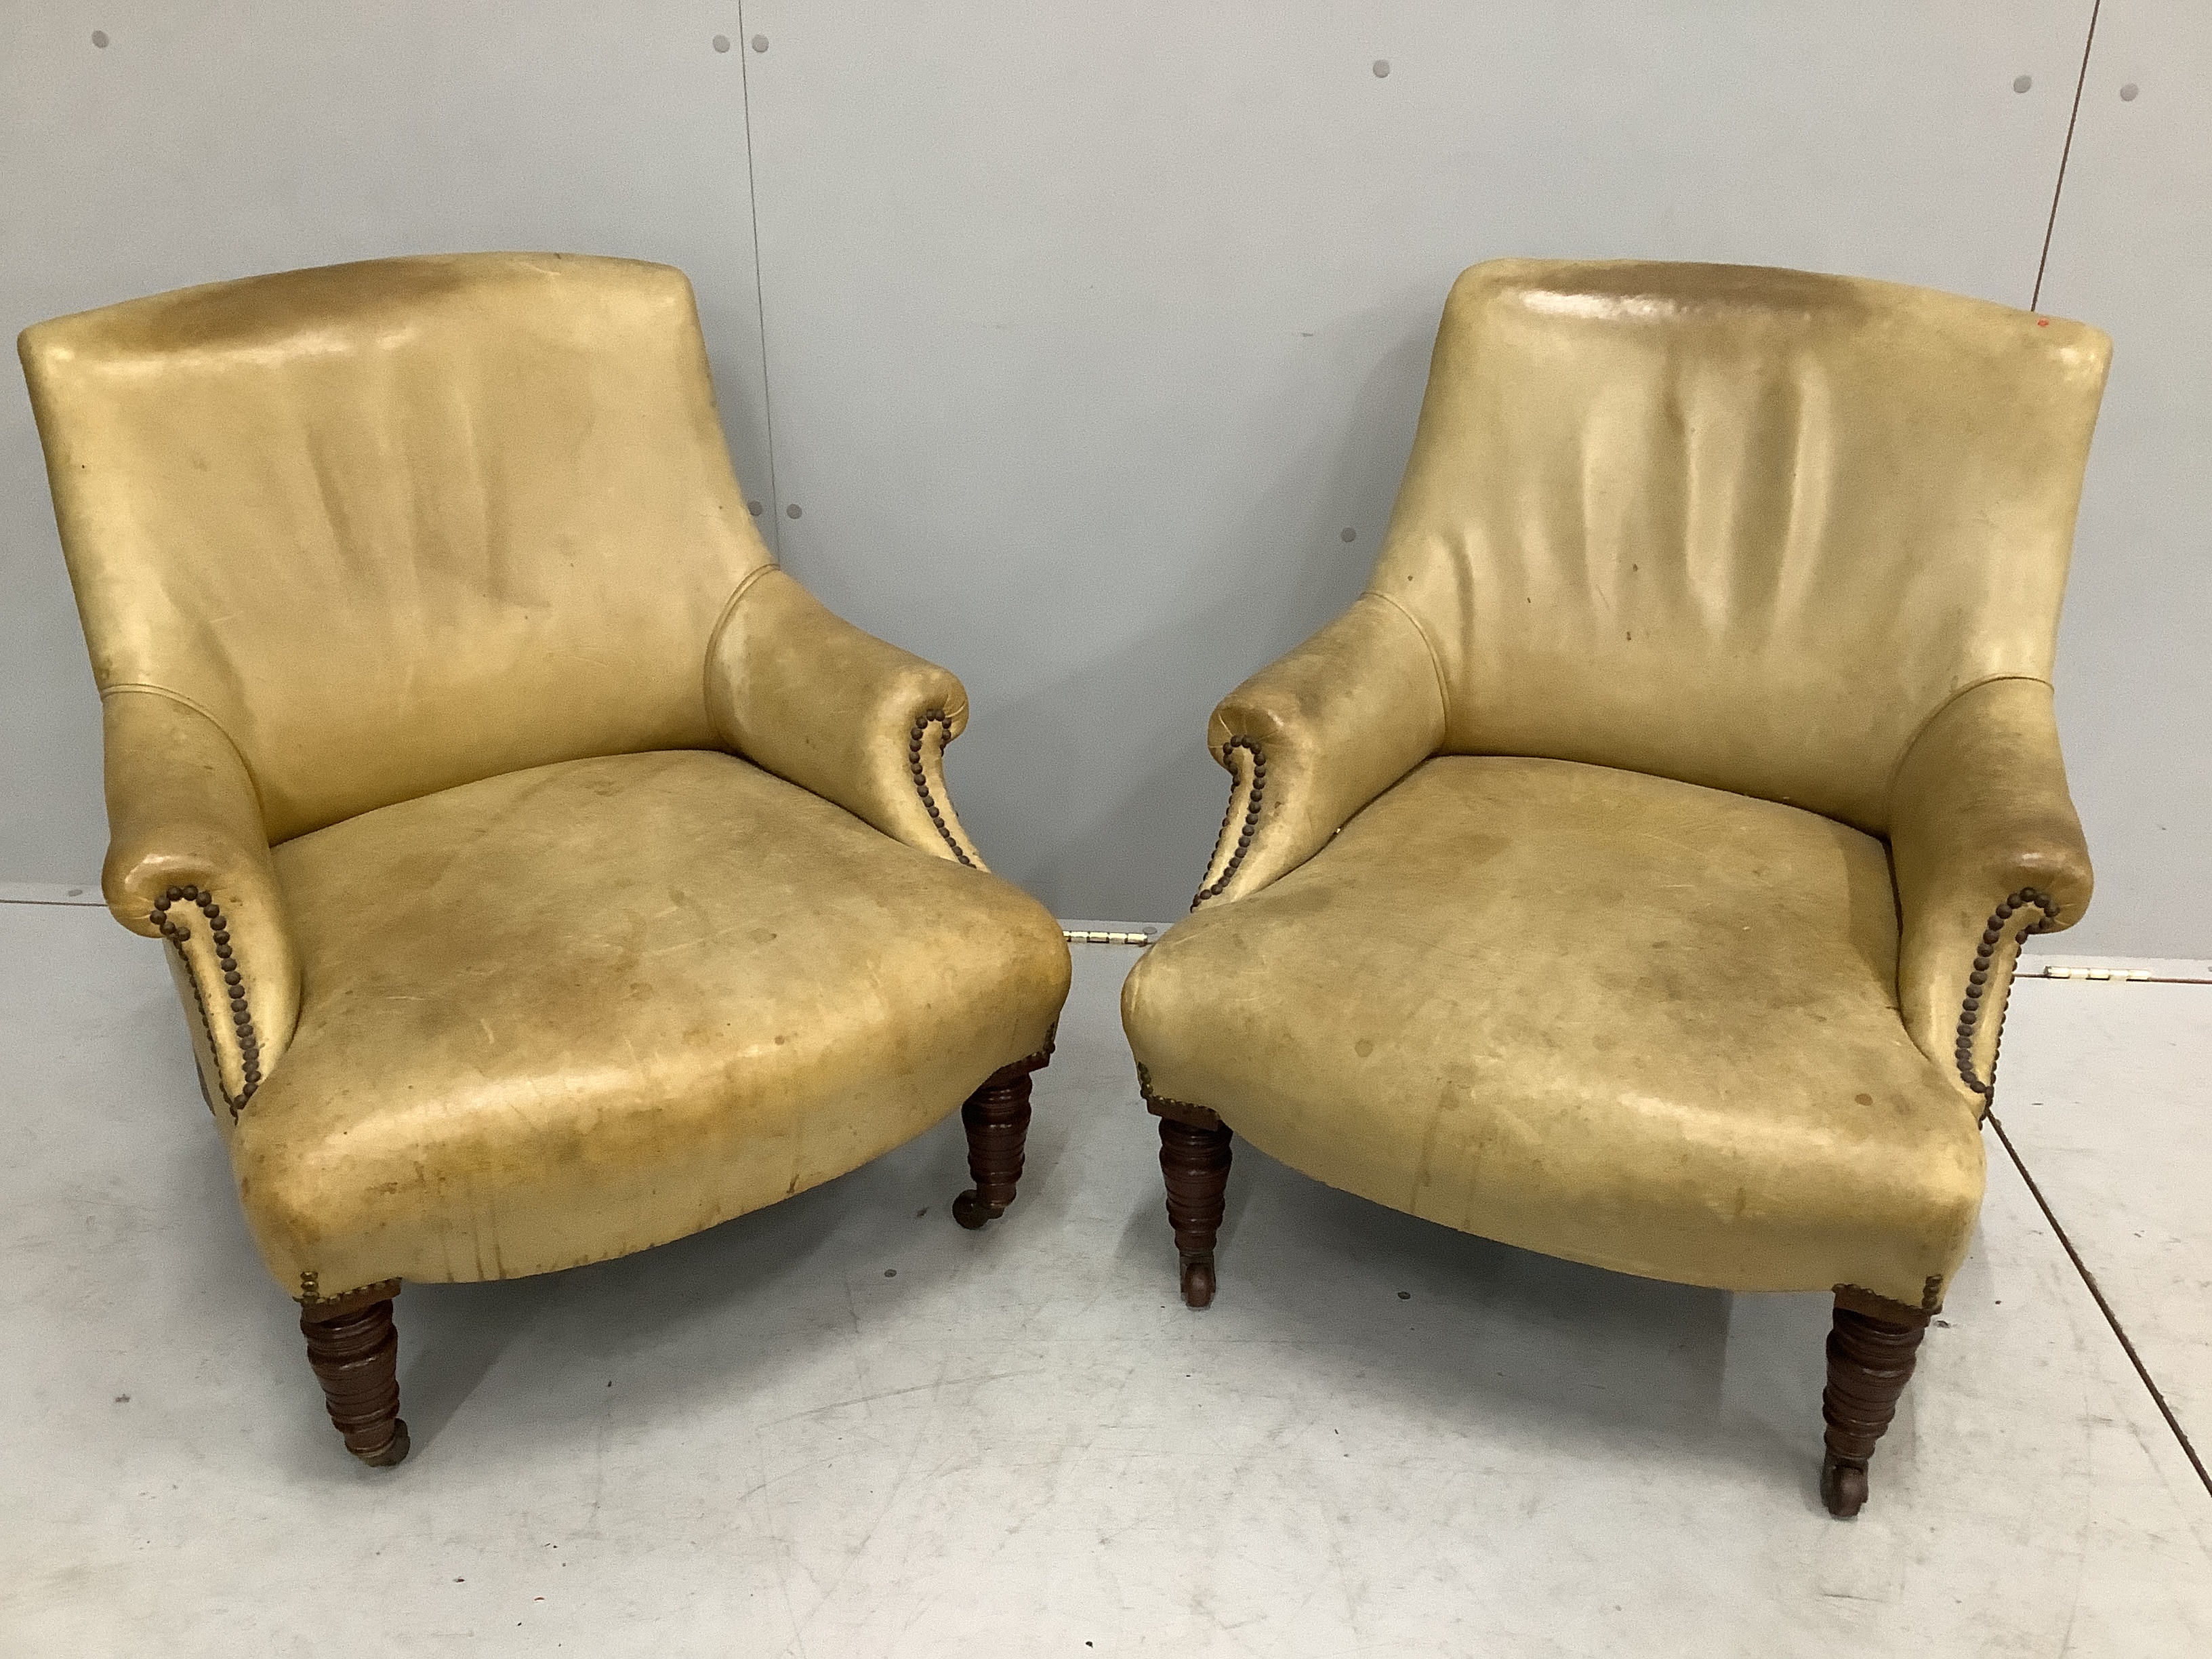 A pair of late Victorian studded leather upholstered armchairs, width 67cm, depth 70cm, height 75cm